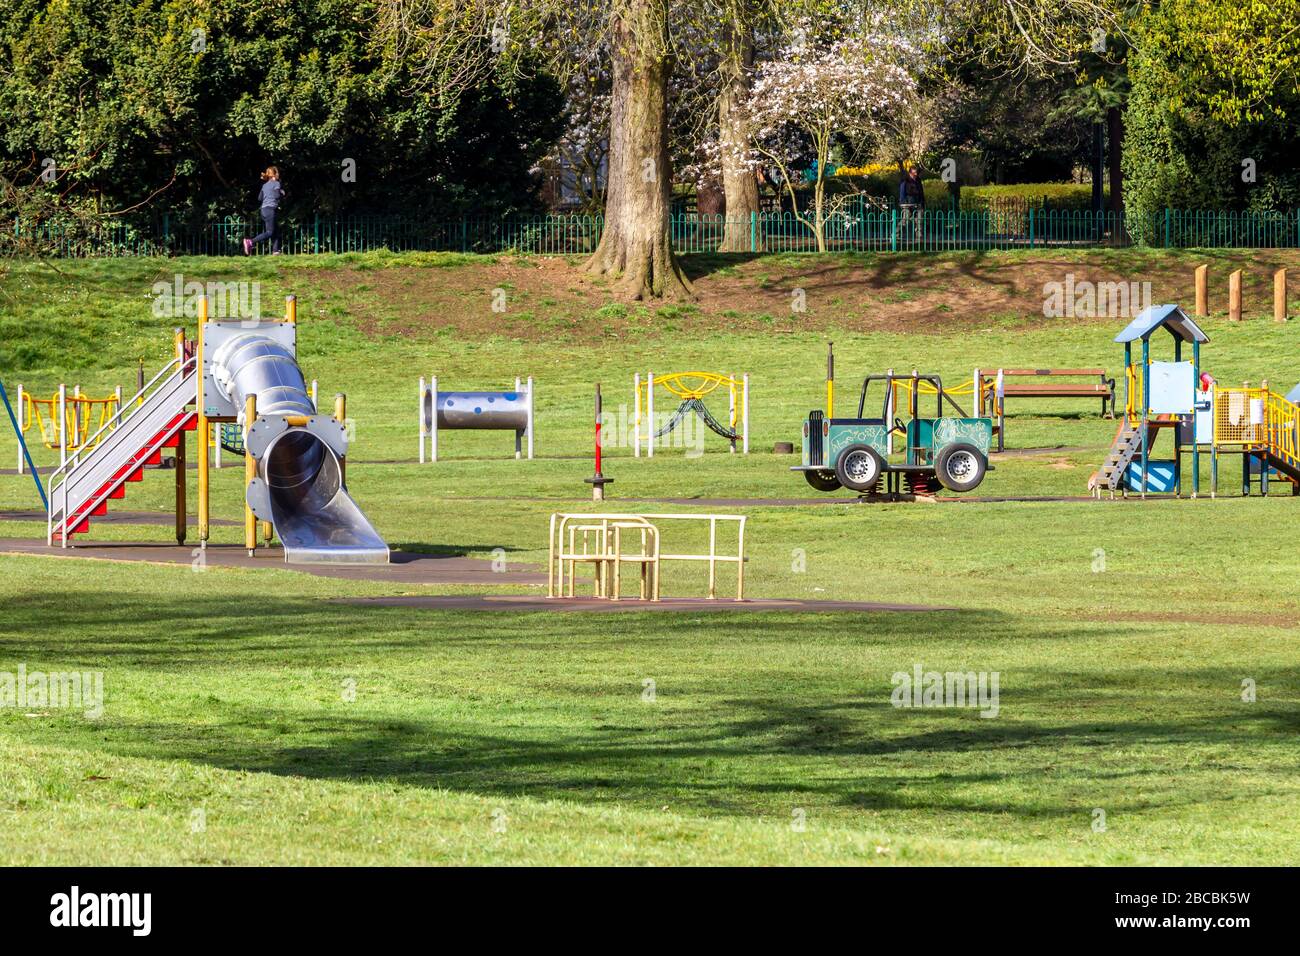 Northampton, UK. 4th April, 2020. Covid-19 lockdown, the children's play area in Abington Park is empty as it's closed due to the Coronavirus, normally it would be busy this time of the morning on a sunny day. Credit: Keith J Smith./Alamy Live News Stock Photo